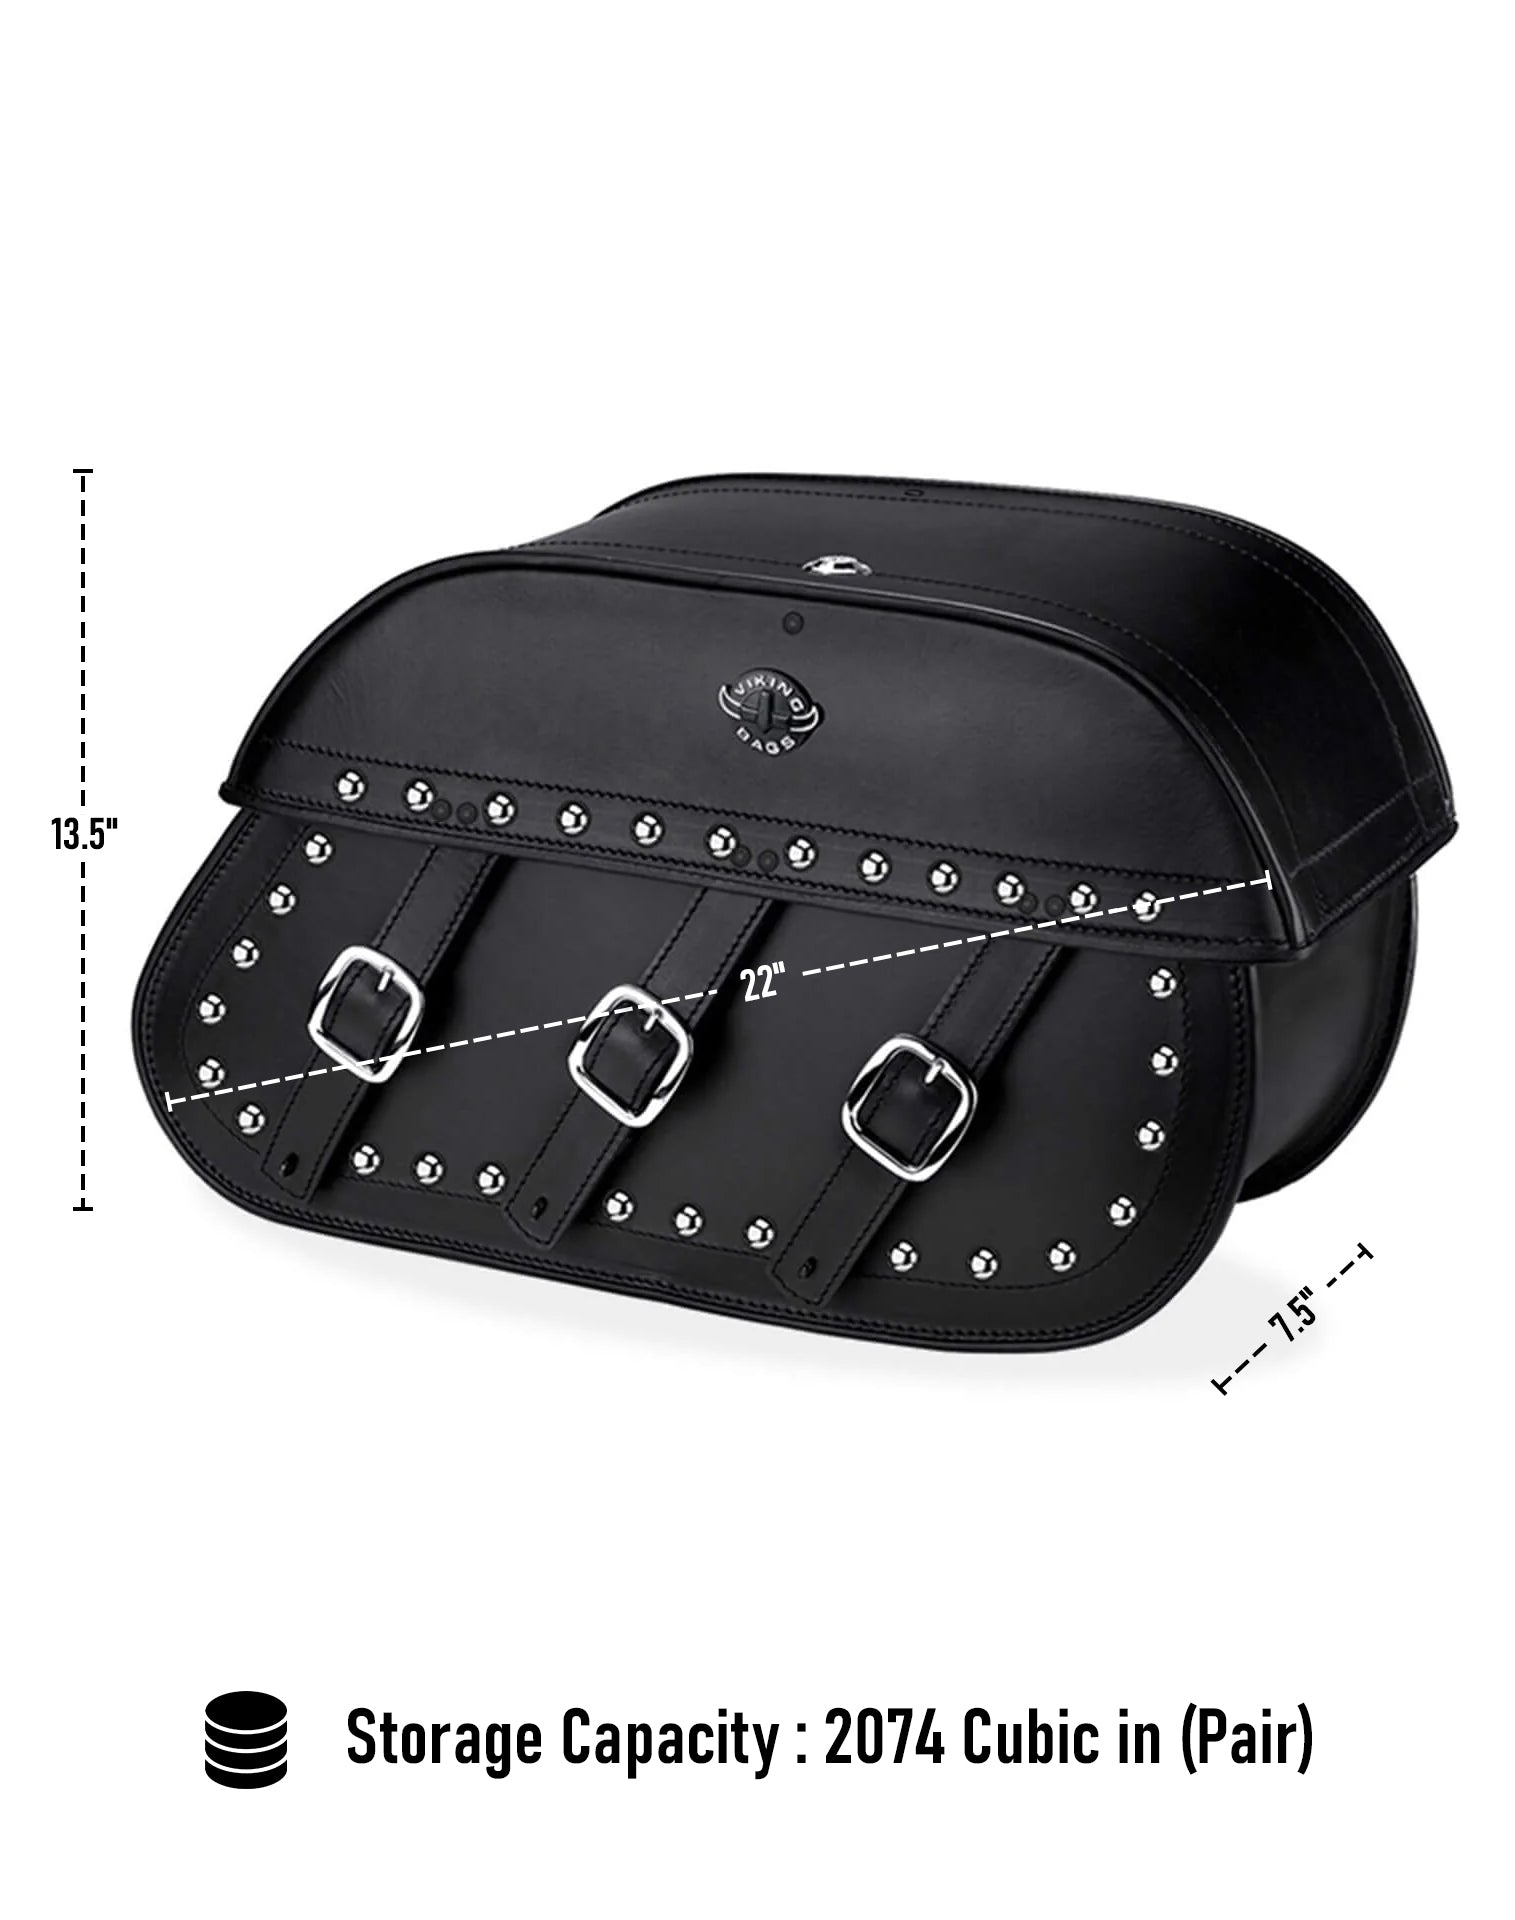 Viking Trianon Extra Large Studded Leather Motorcycle Saddlebags For Harley Softail Slim Can Store Your Ridings Gears